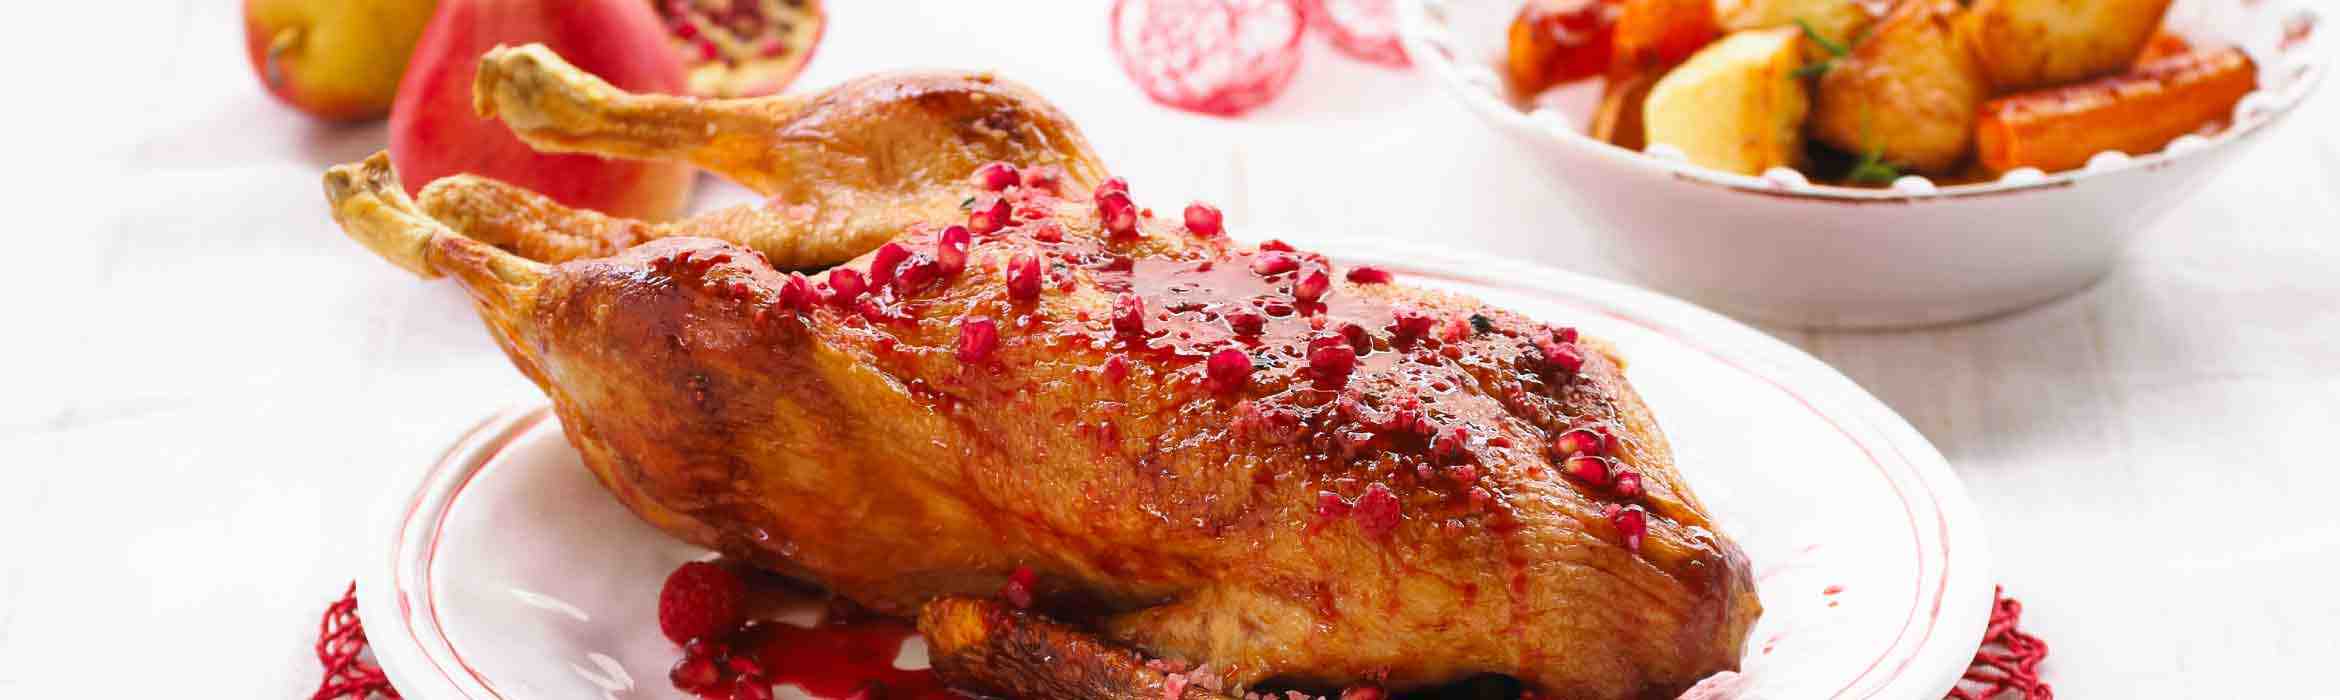 Festive Duck with Raspberry and Thyme served with Pomegranate Sauce Recipe